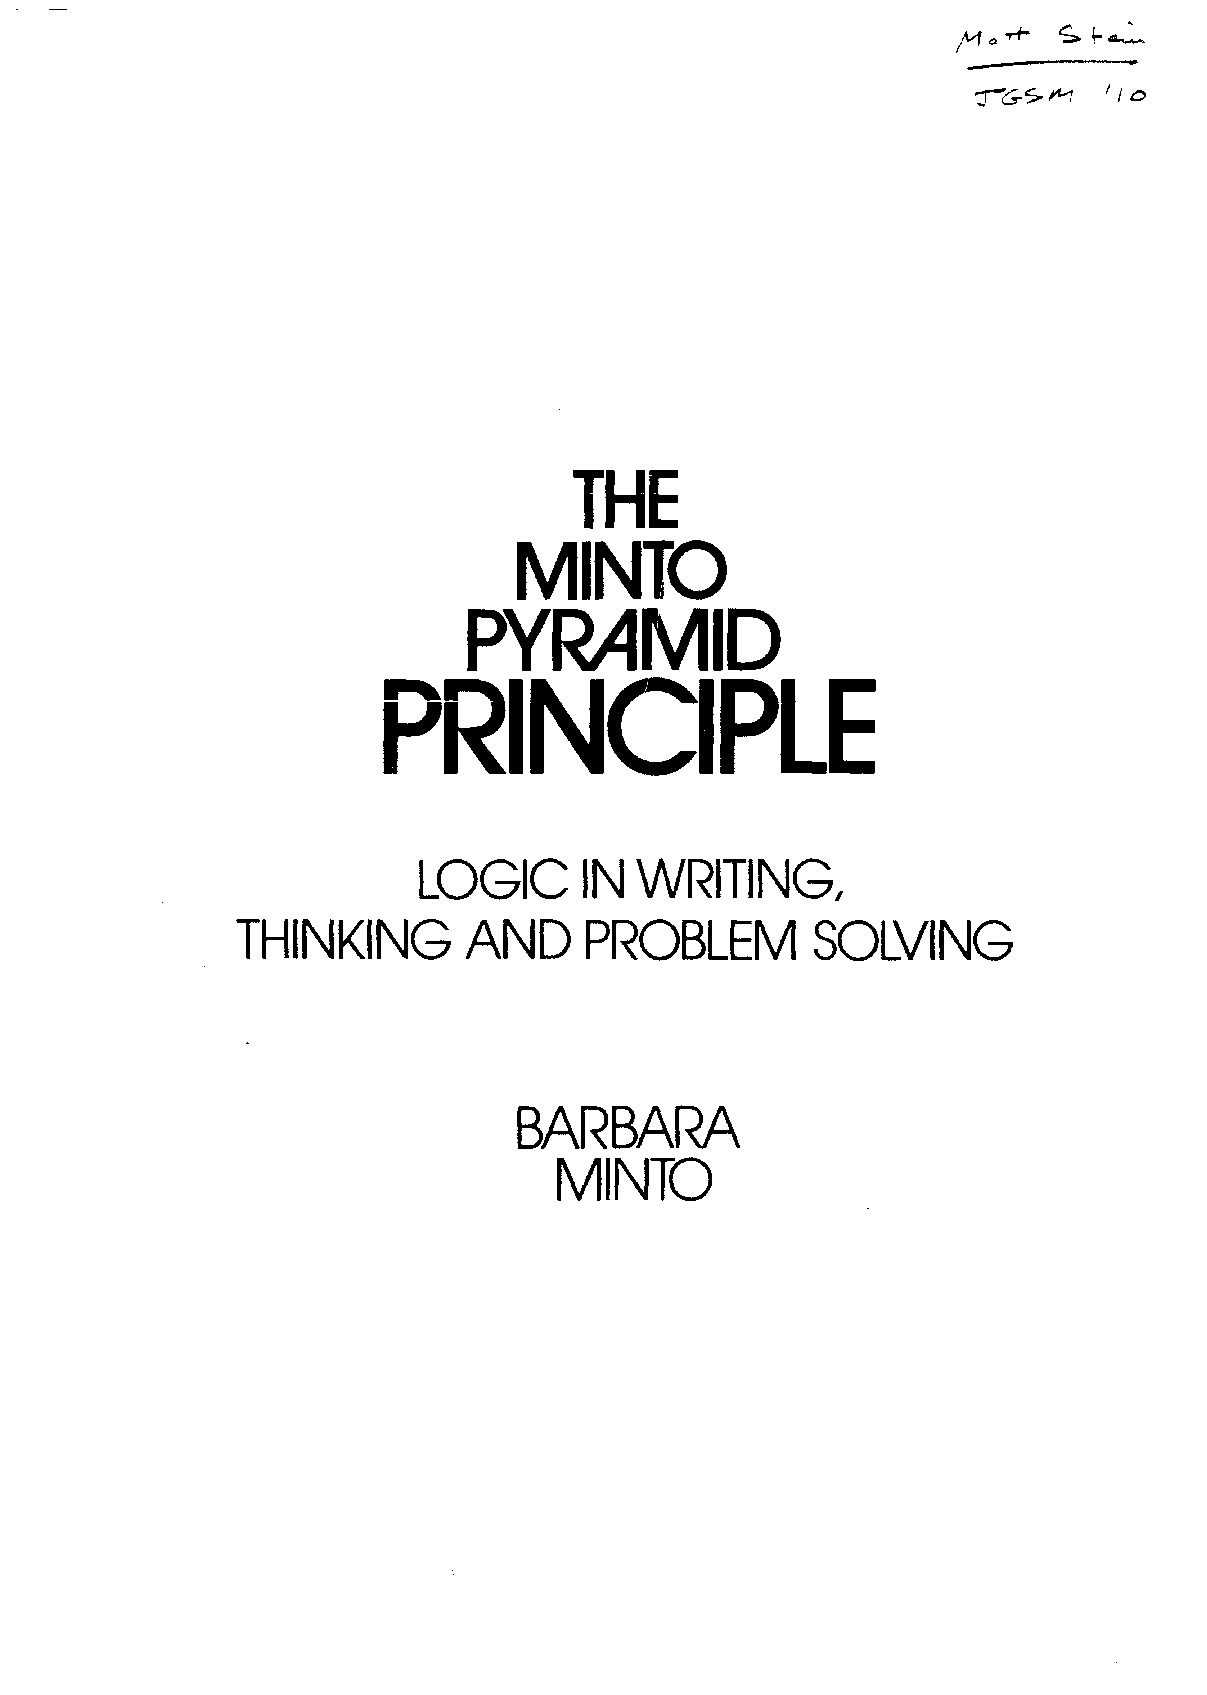 The Minto Pyramid Principle – Logic in Writing, Thinking, & Problem Solving